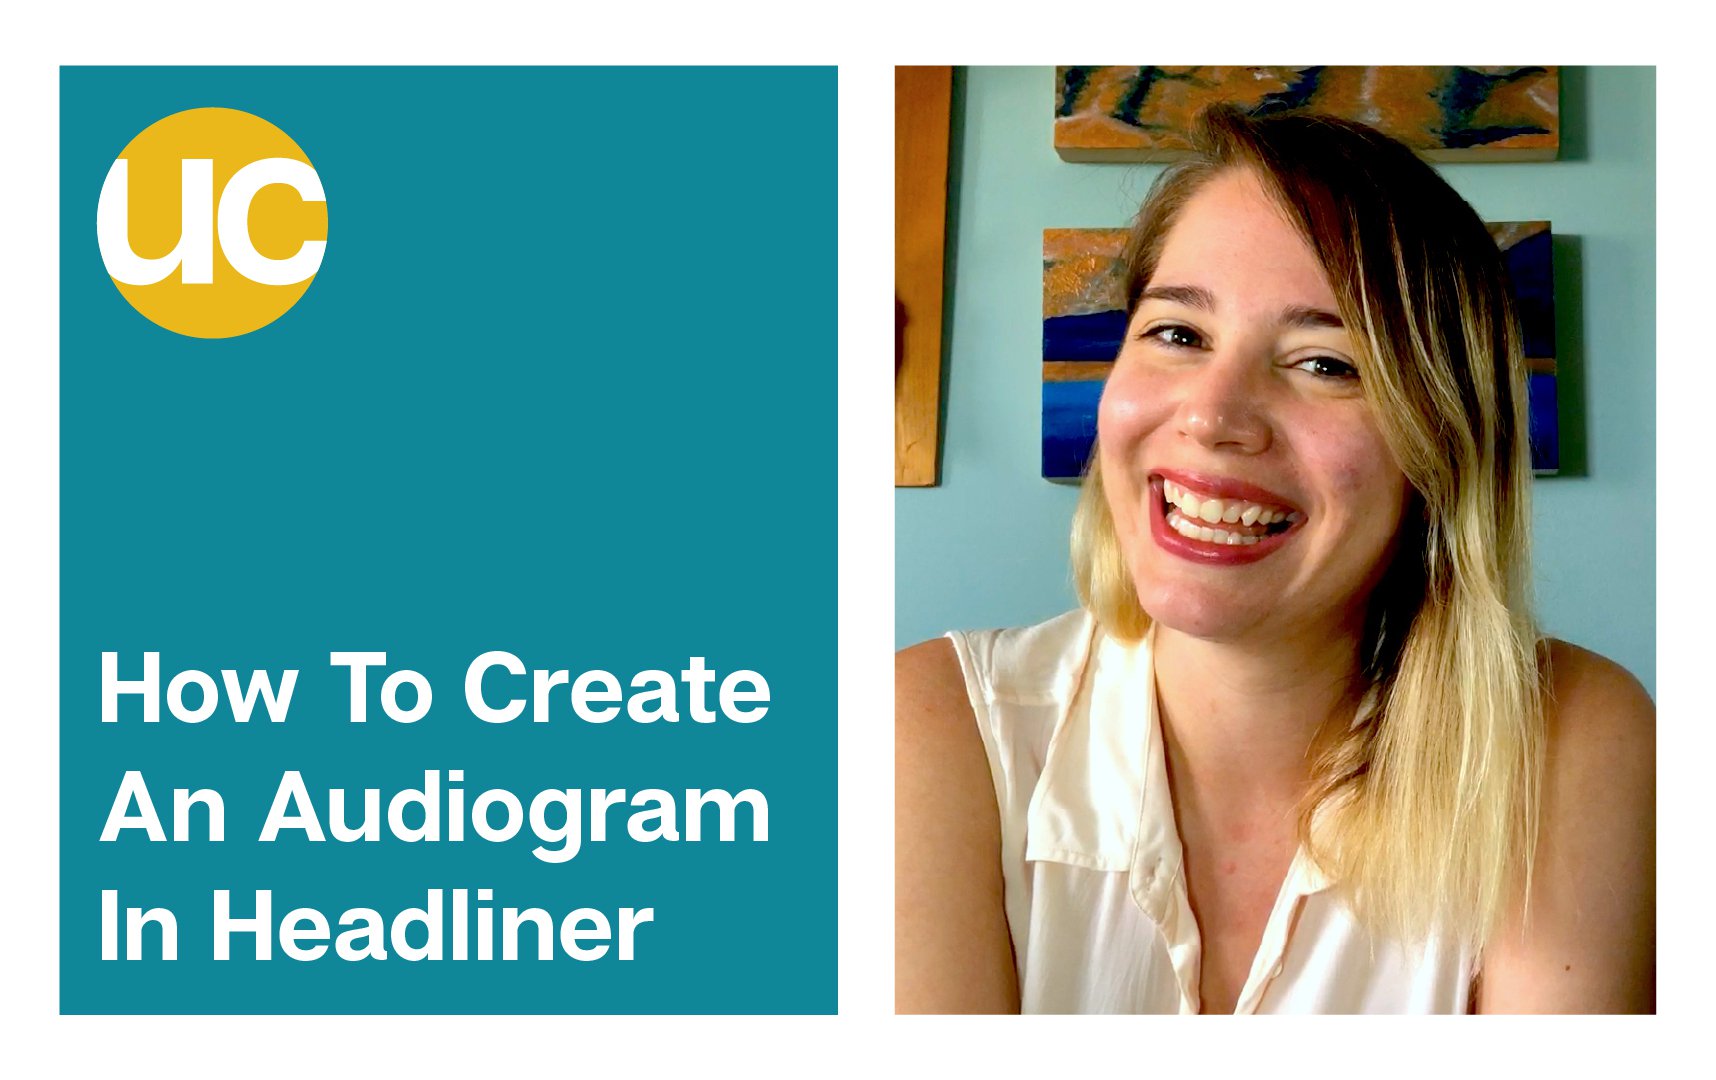 How to make an audiogram featured image - text on the left that reads "how to create an audiogram using headliner" and emily milling smiling on the right.